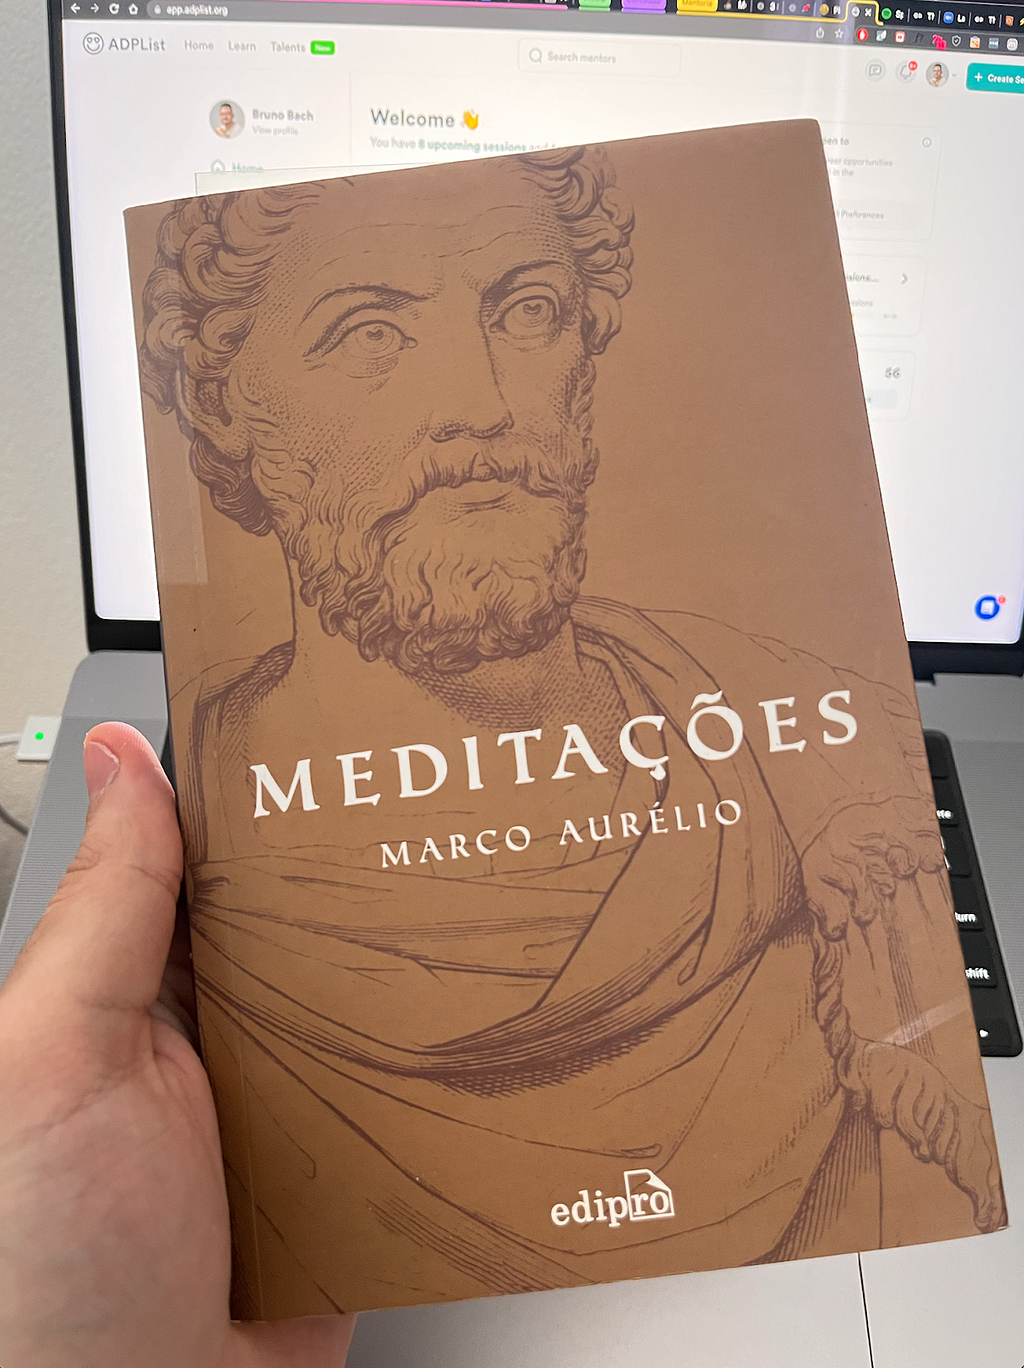 the cover of Meditations, by Marco Aurélio